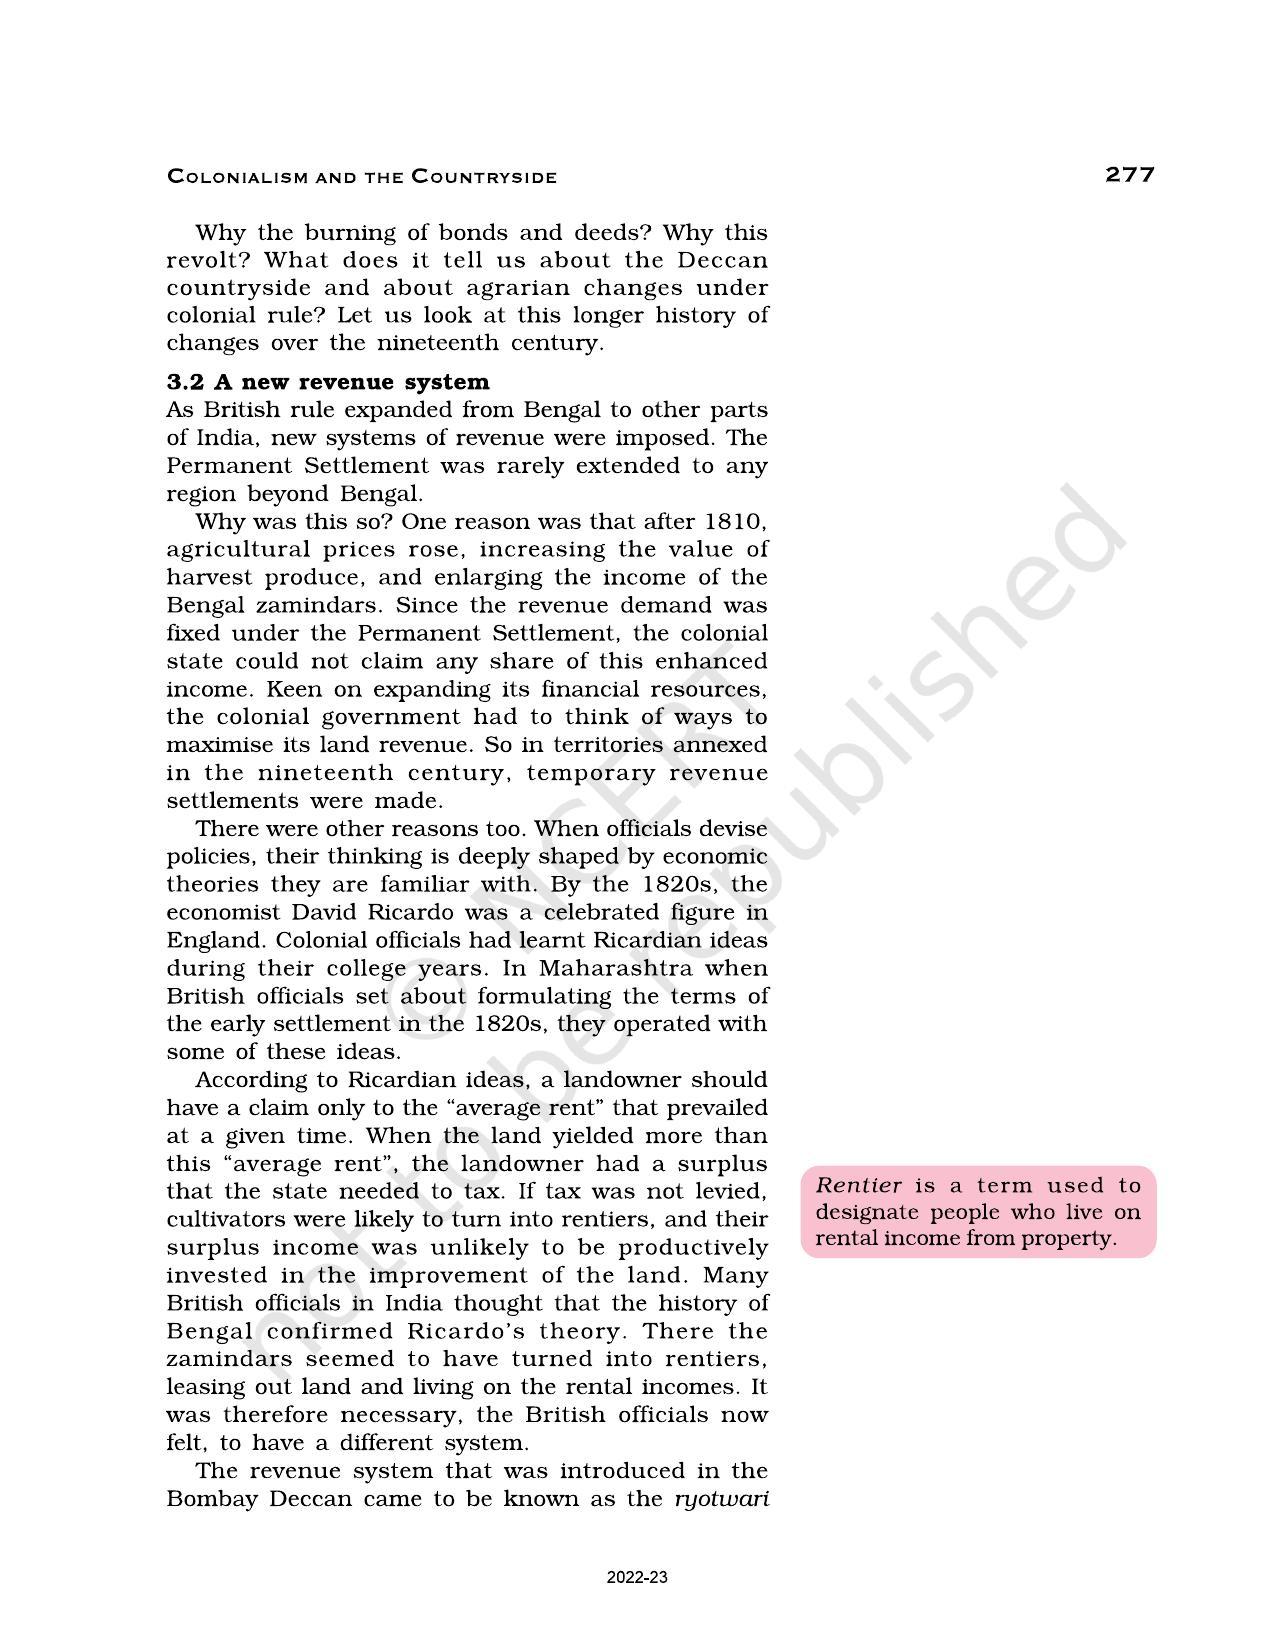 NCERT Book for Class 12 History (Part-II) Chapter 10 Colonialism and the Countryside - Page 21